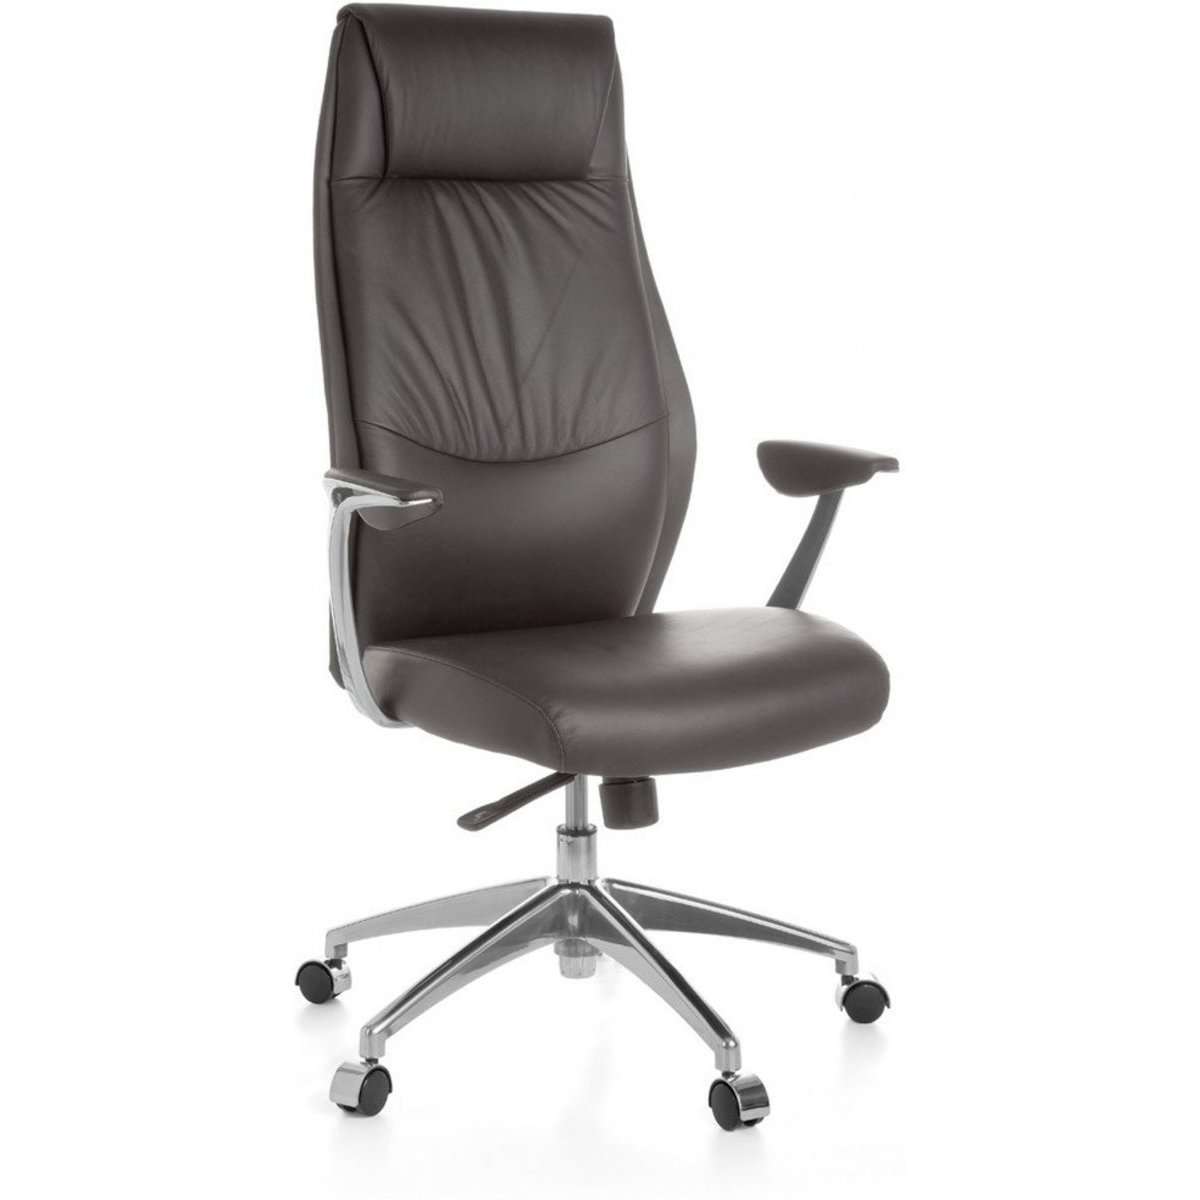 Nancy's North Riverdale Office Chair - Executive Chair - Leather Office Chair - Office Chairs For Adults